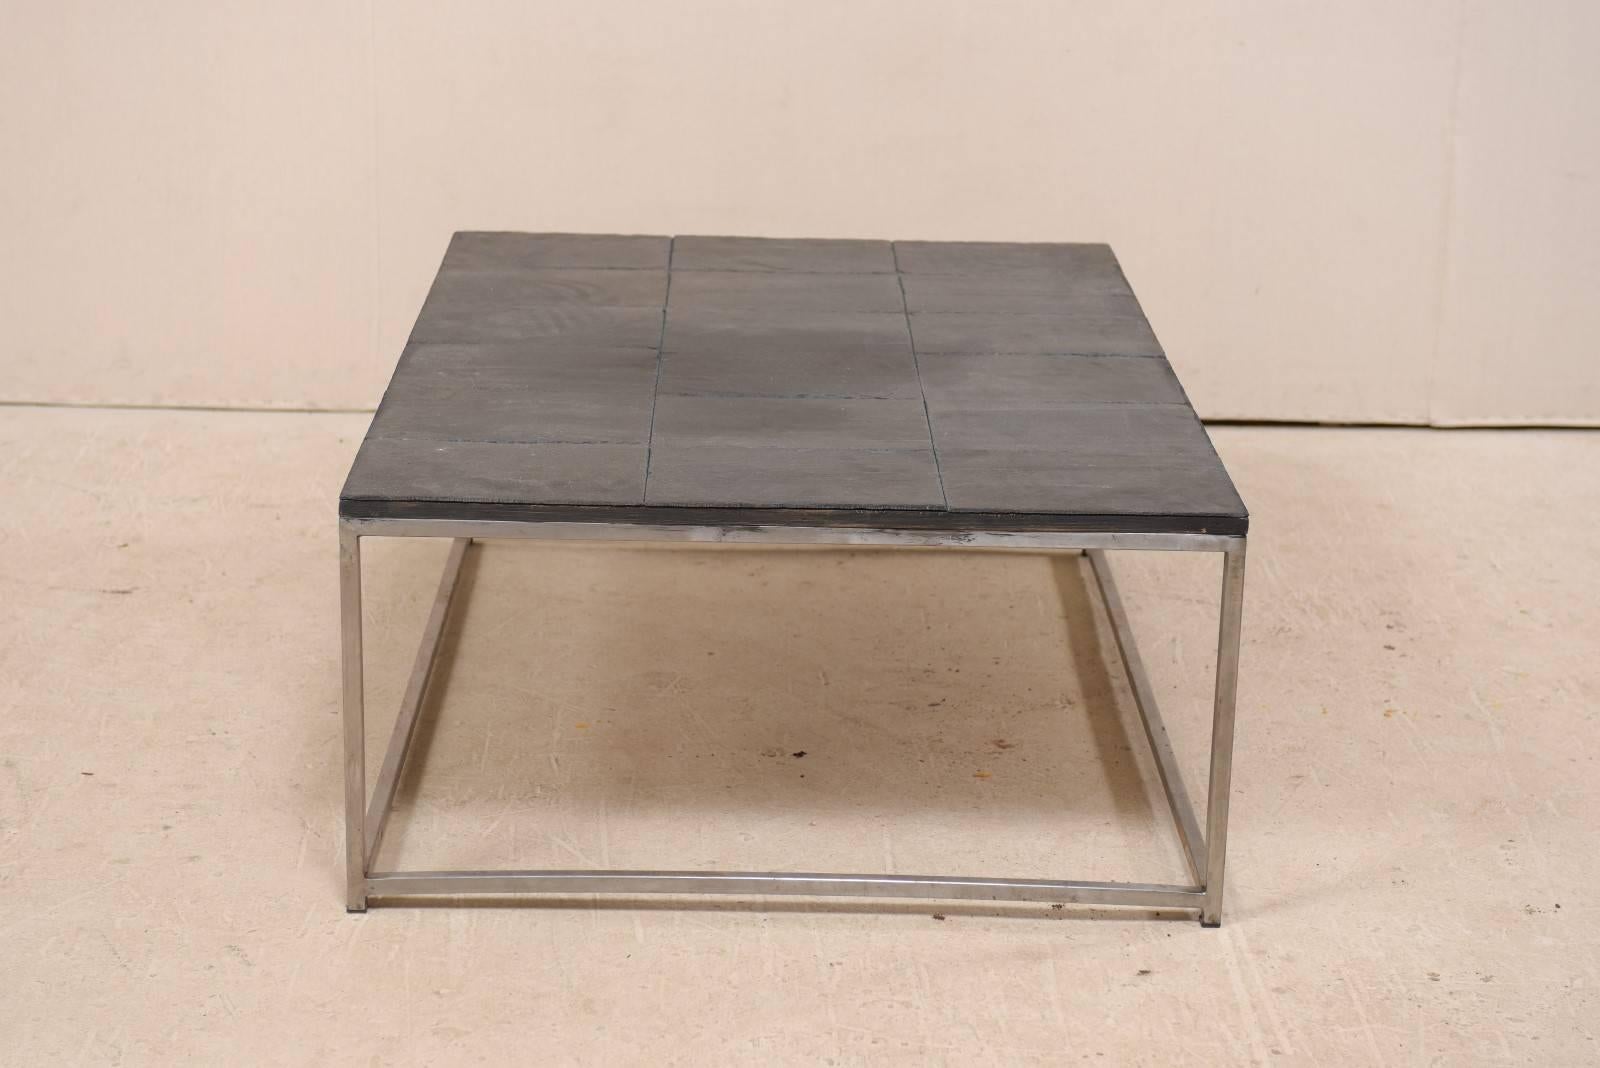 Modern Style Coffee Table with Slate Tiled Top and Stylish Custom Metal Base In Good Condition For Sale In Atlanta, GA